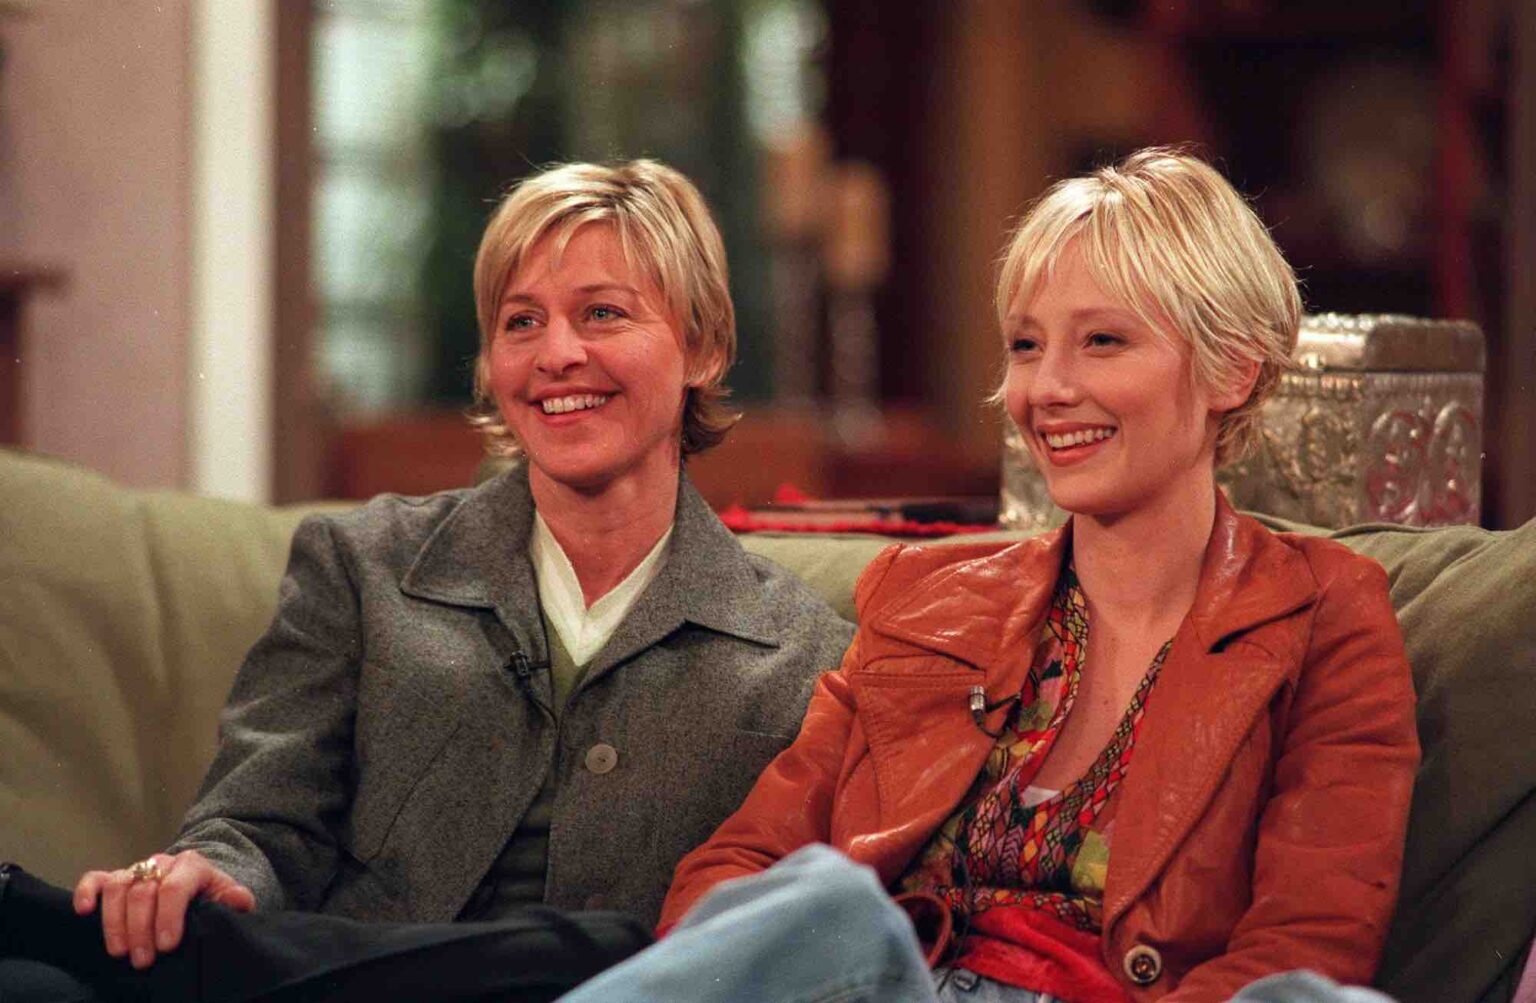 Did you know that Ellen DeGeneres had a relationship before her wife Portia de Rossi? Read about Anne Heche and their relationship together.